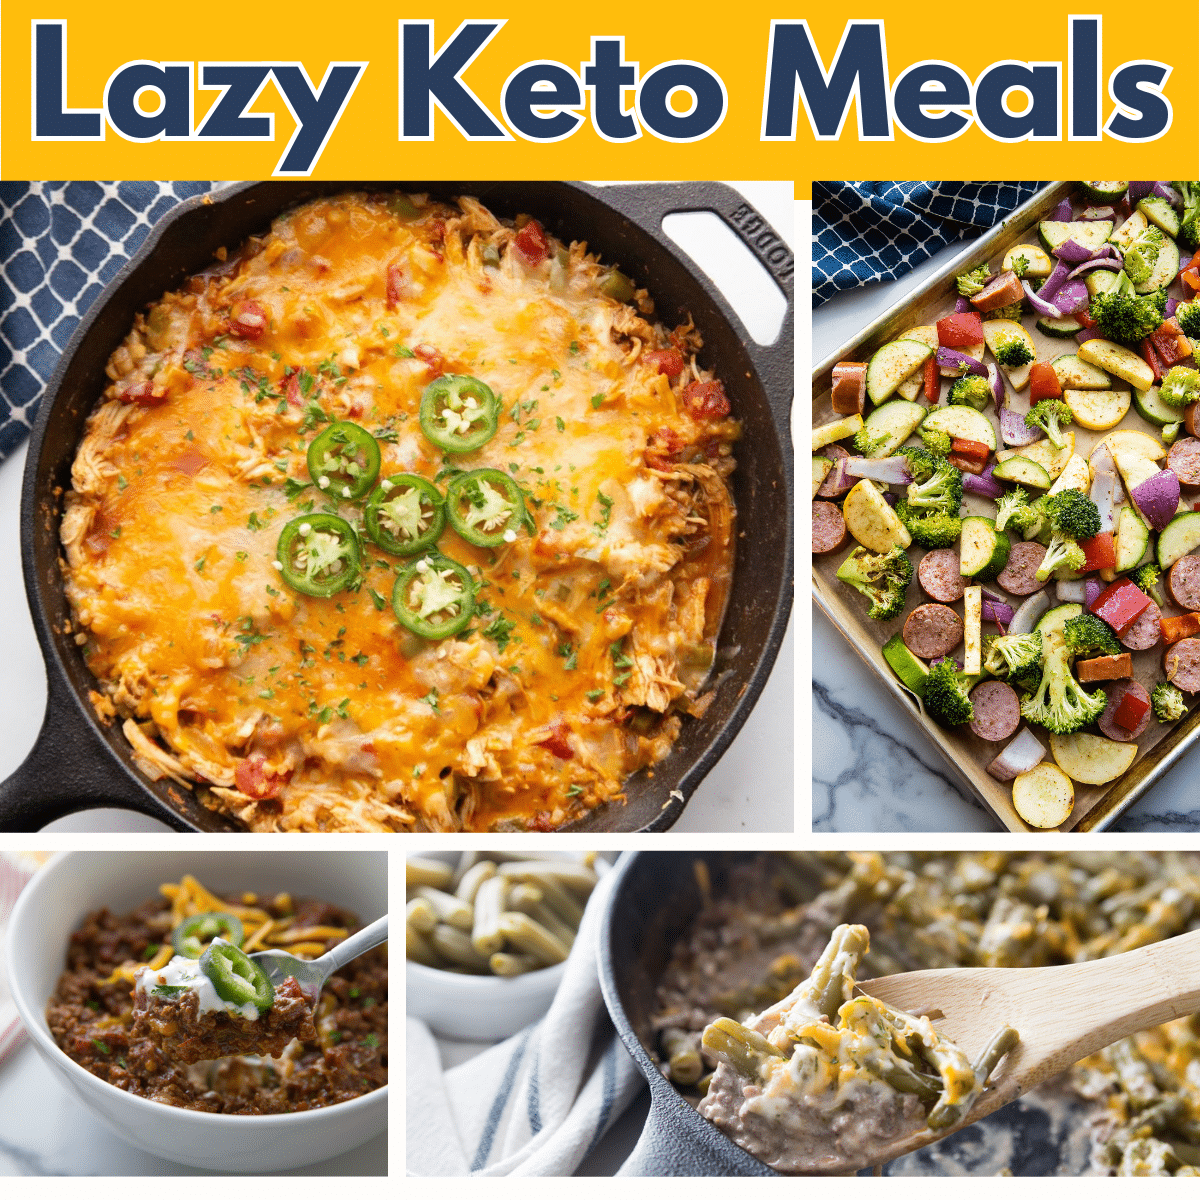 : A collage of four keto meal images under the title "Lazy Keto Meals". The dishes shown are: a cheesy chicken casserole topped with jalapenos in a skillet, a sheet pan with mixed vegetables and sausage, a bowl of ground beef chili, and a creamy ground beef and vegetable casserole being scooped with a wooden spoon.